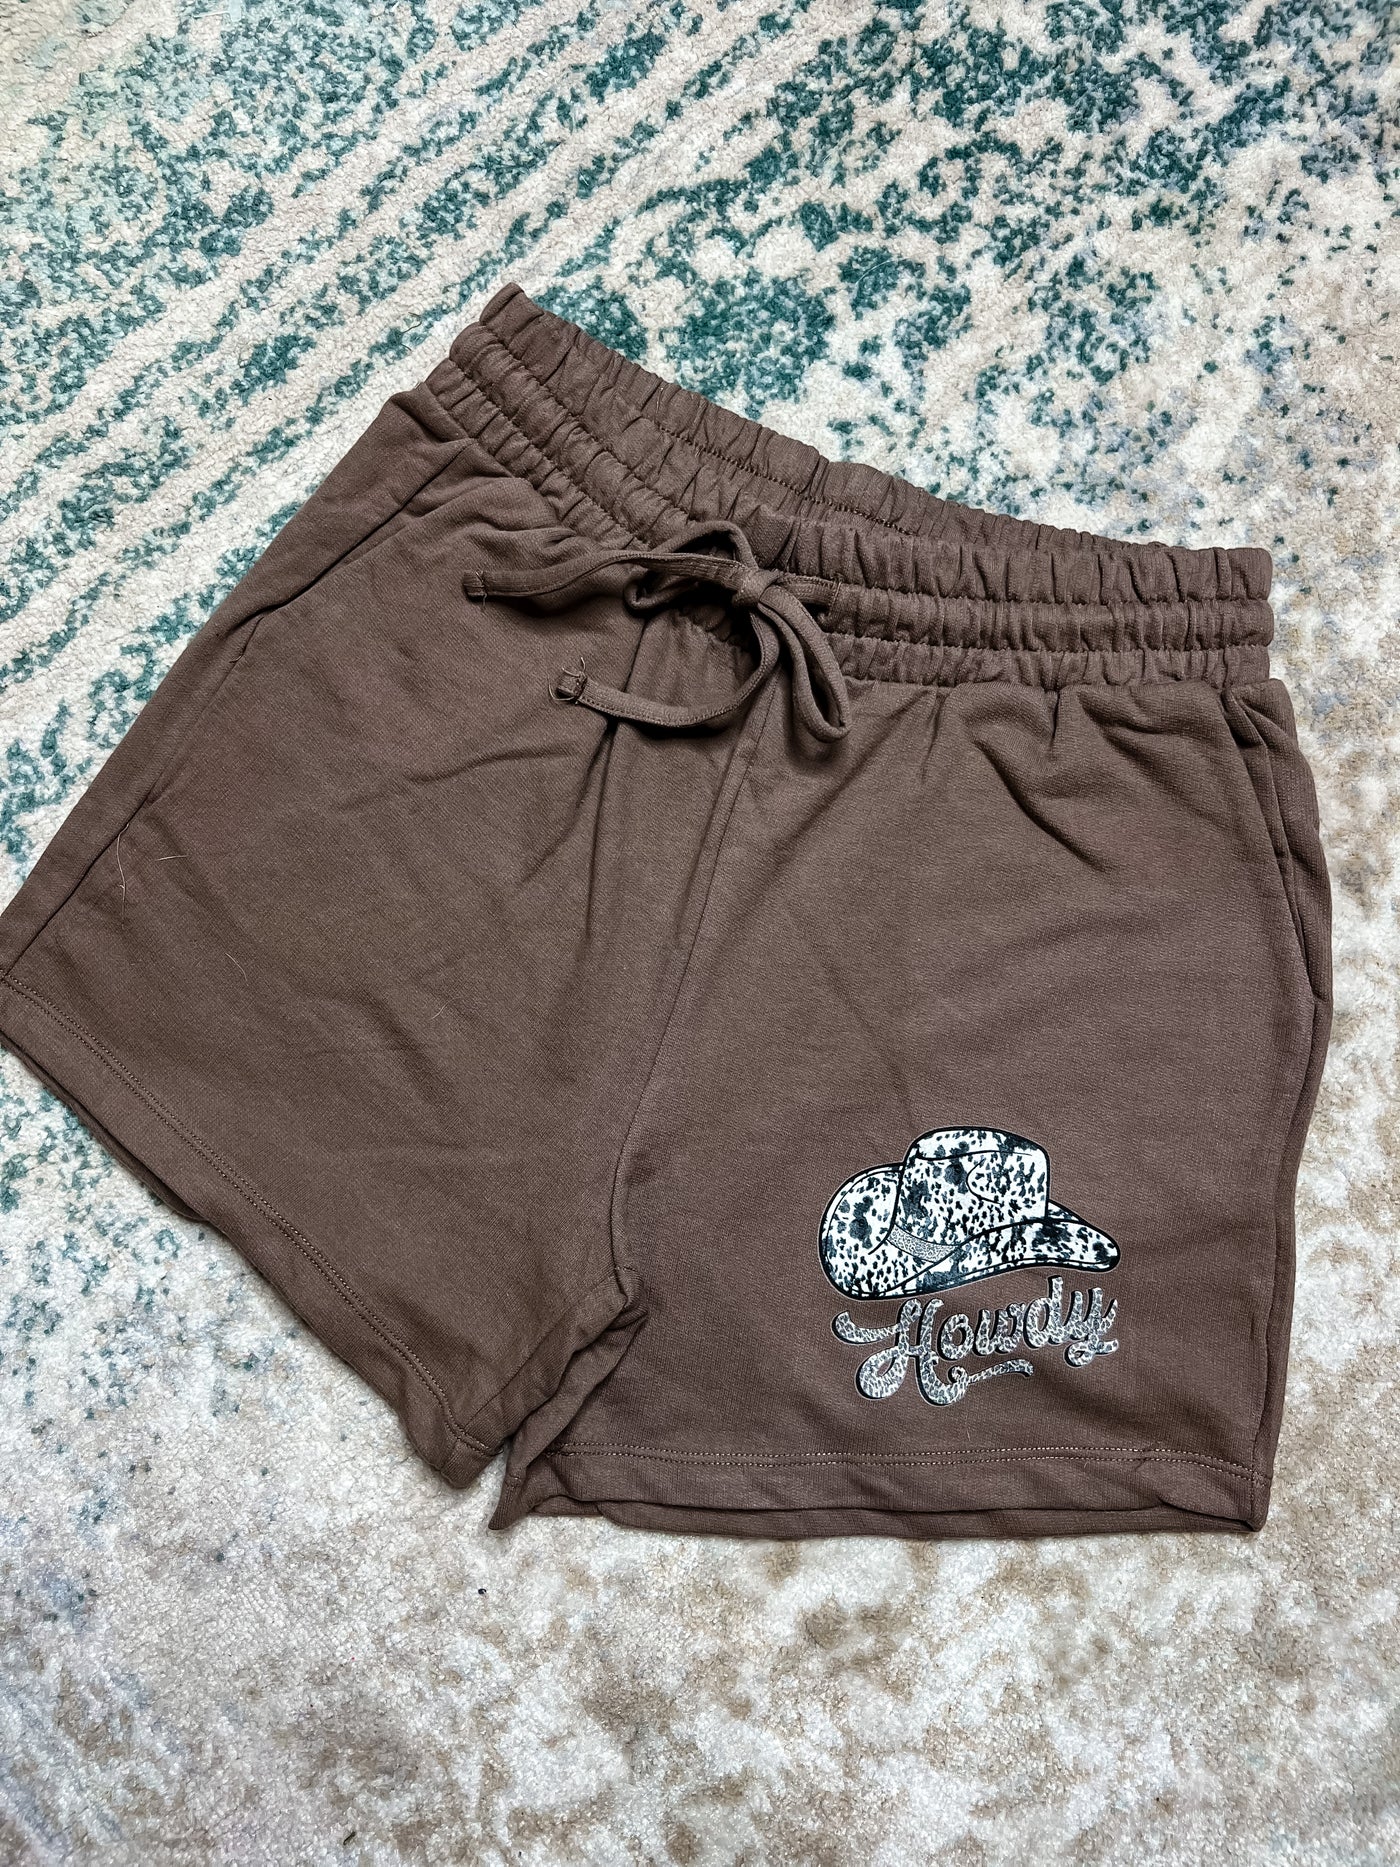 READY-TO-SHIP "Howdy Hat" Lounge Shorts